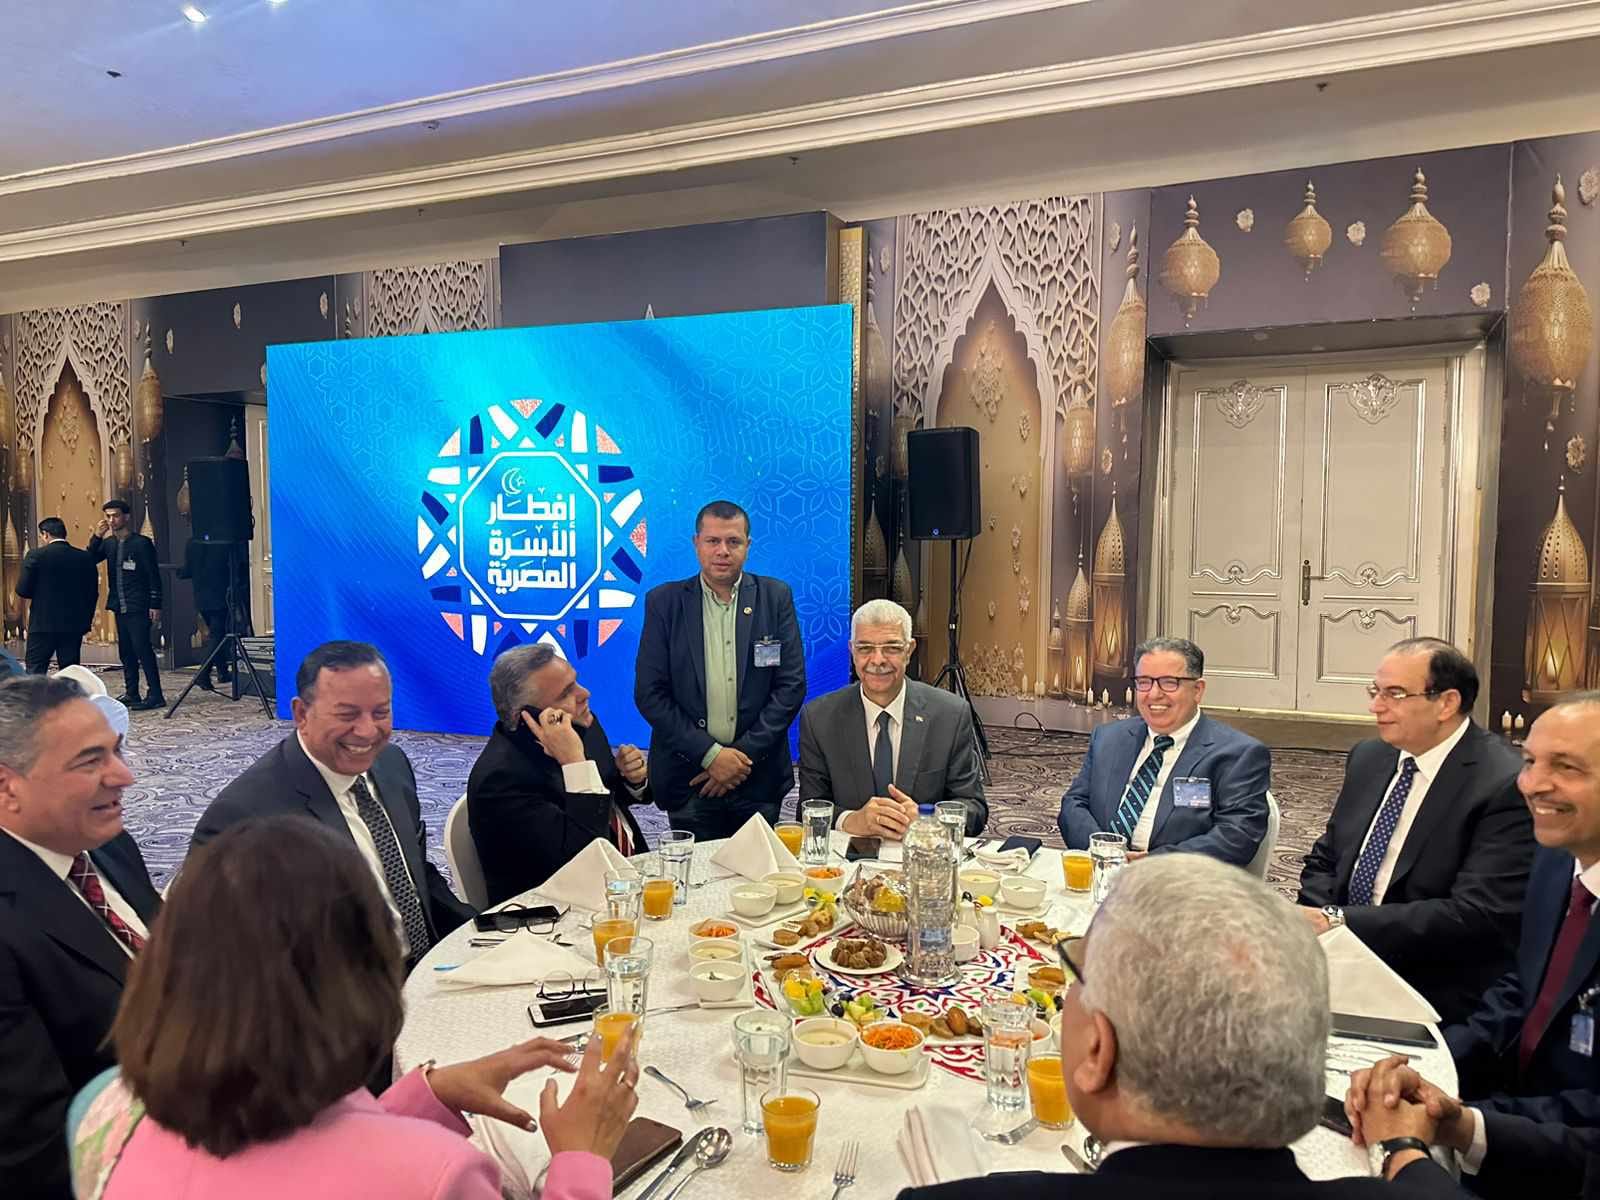 In the presence of the President of the Republic, the President of Menoufia University participates in the Egyptian family’s Iftar celebration